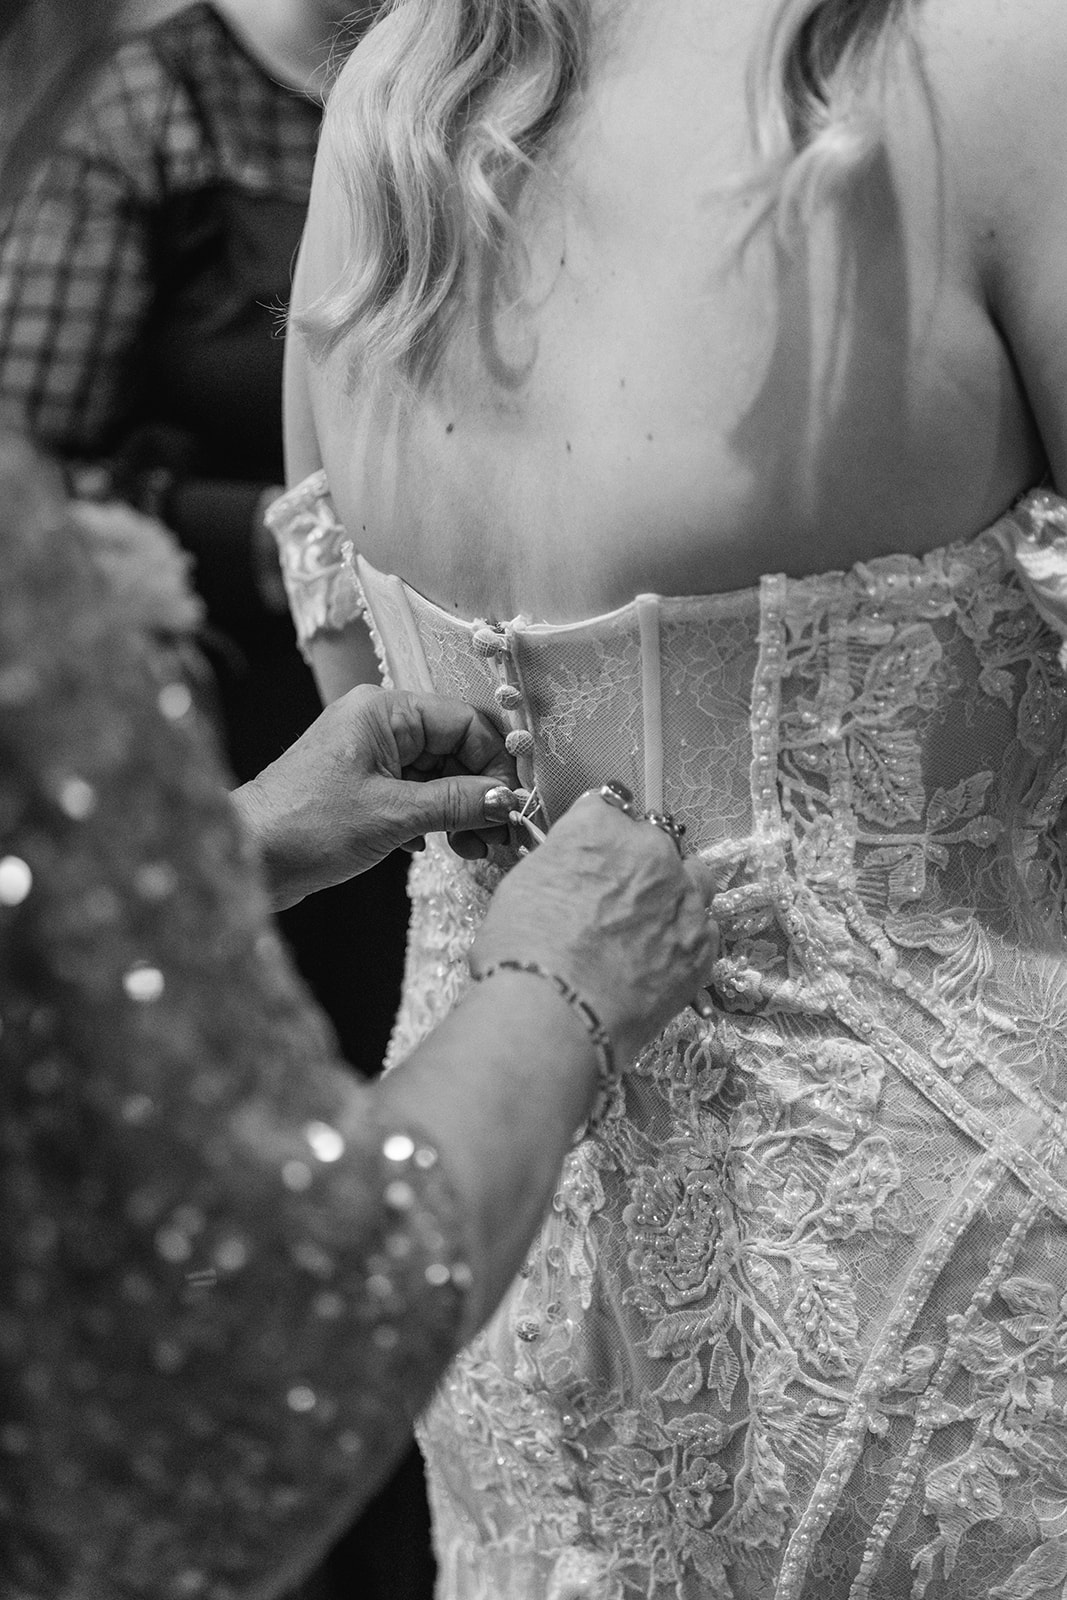 Bride putting on her dress at a Southlands barn wedding, Sussex. Photo by OliveJoy Photography.